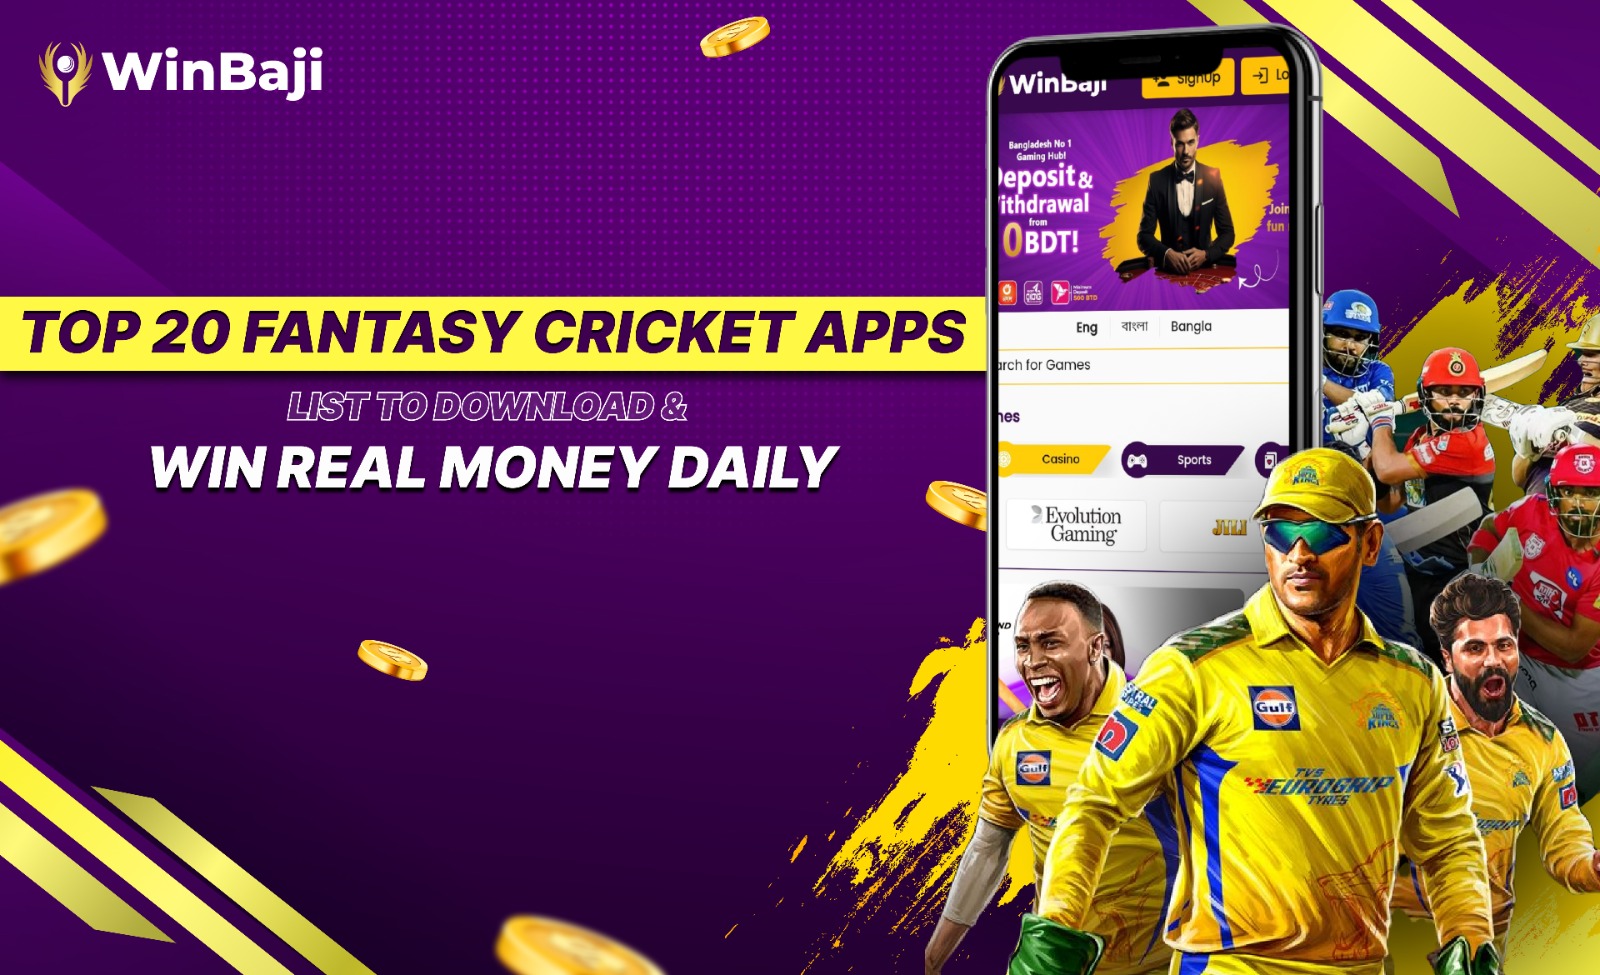 Top 20 Fantasy Cricket Apps List To Download & Win Real Money Daily